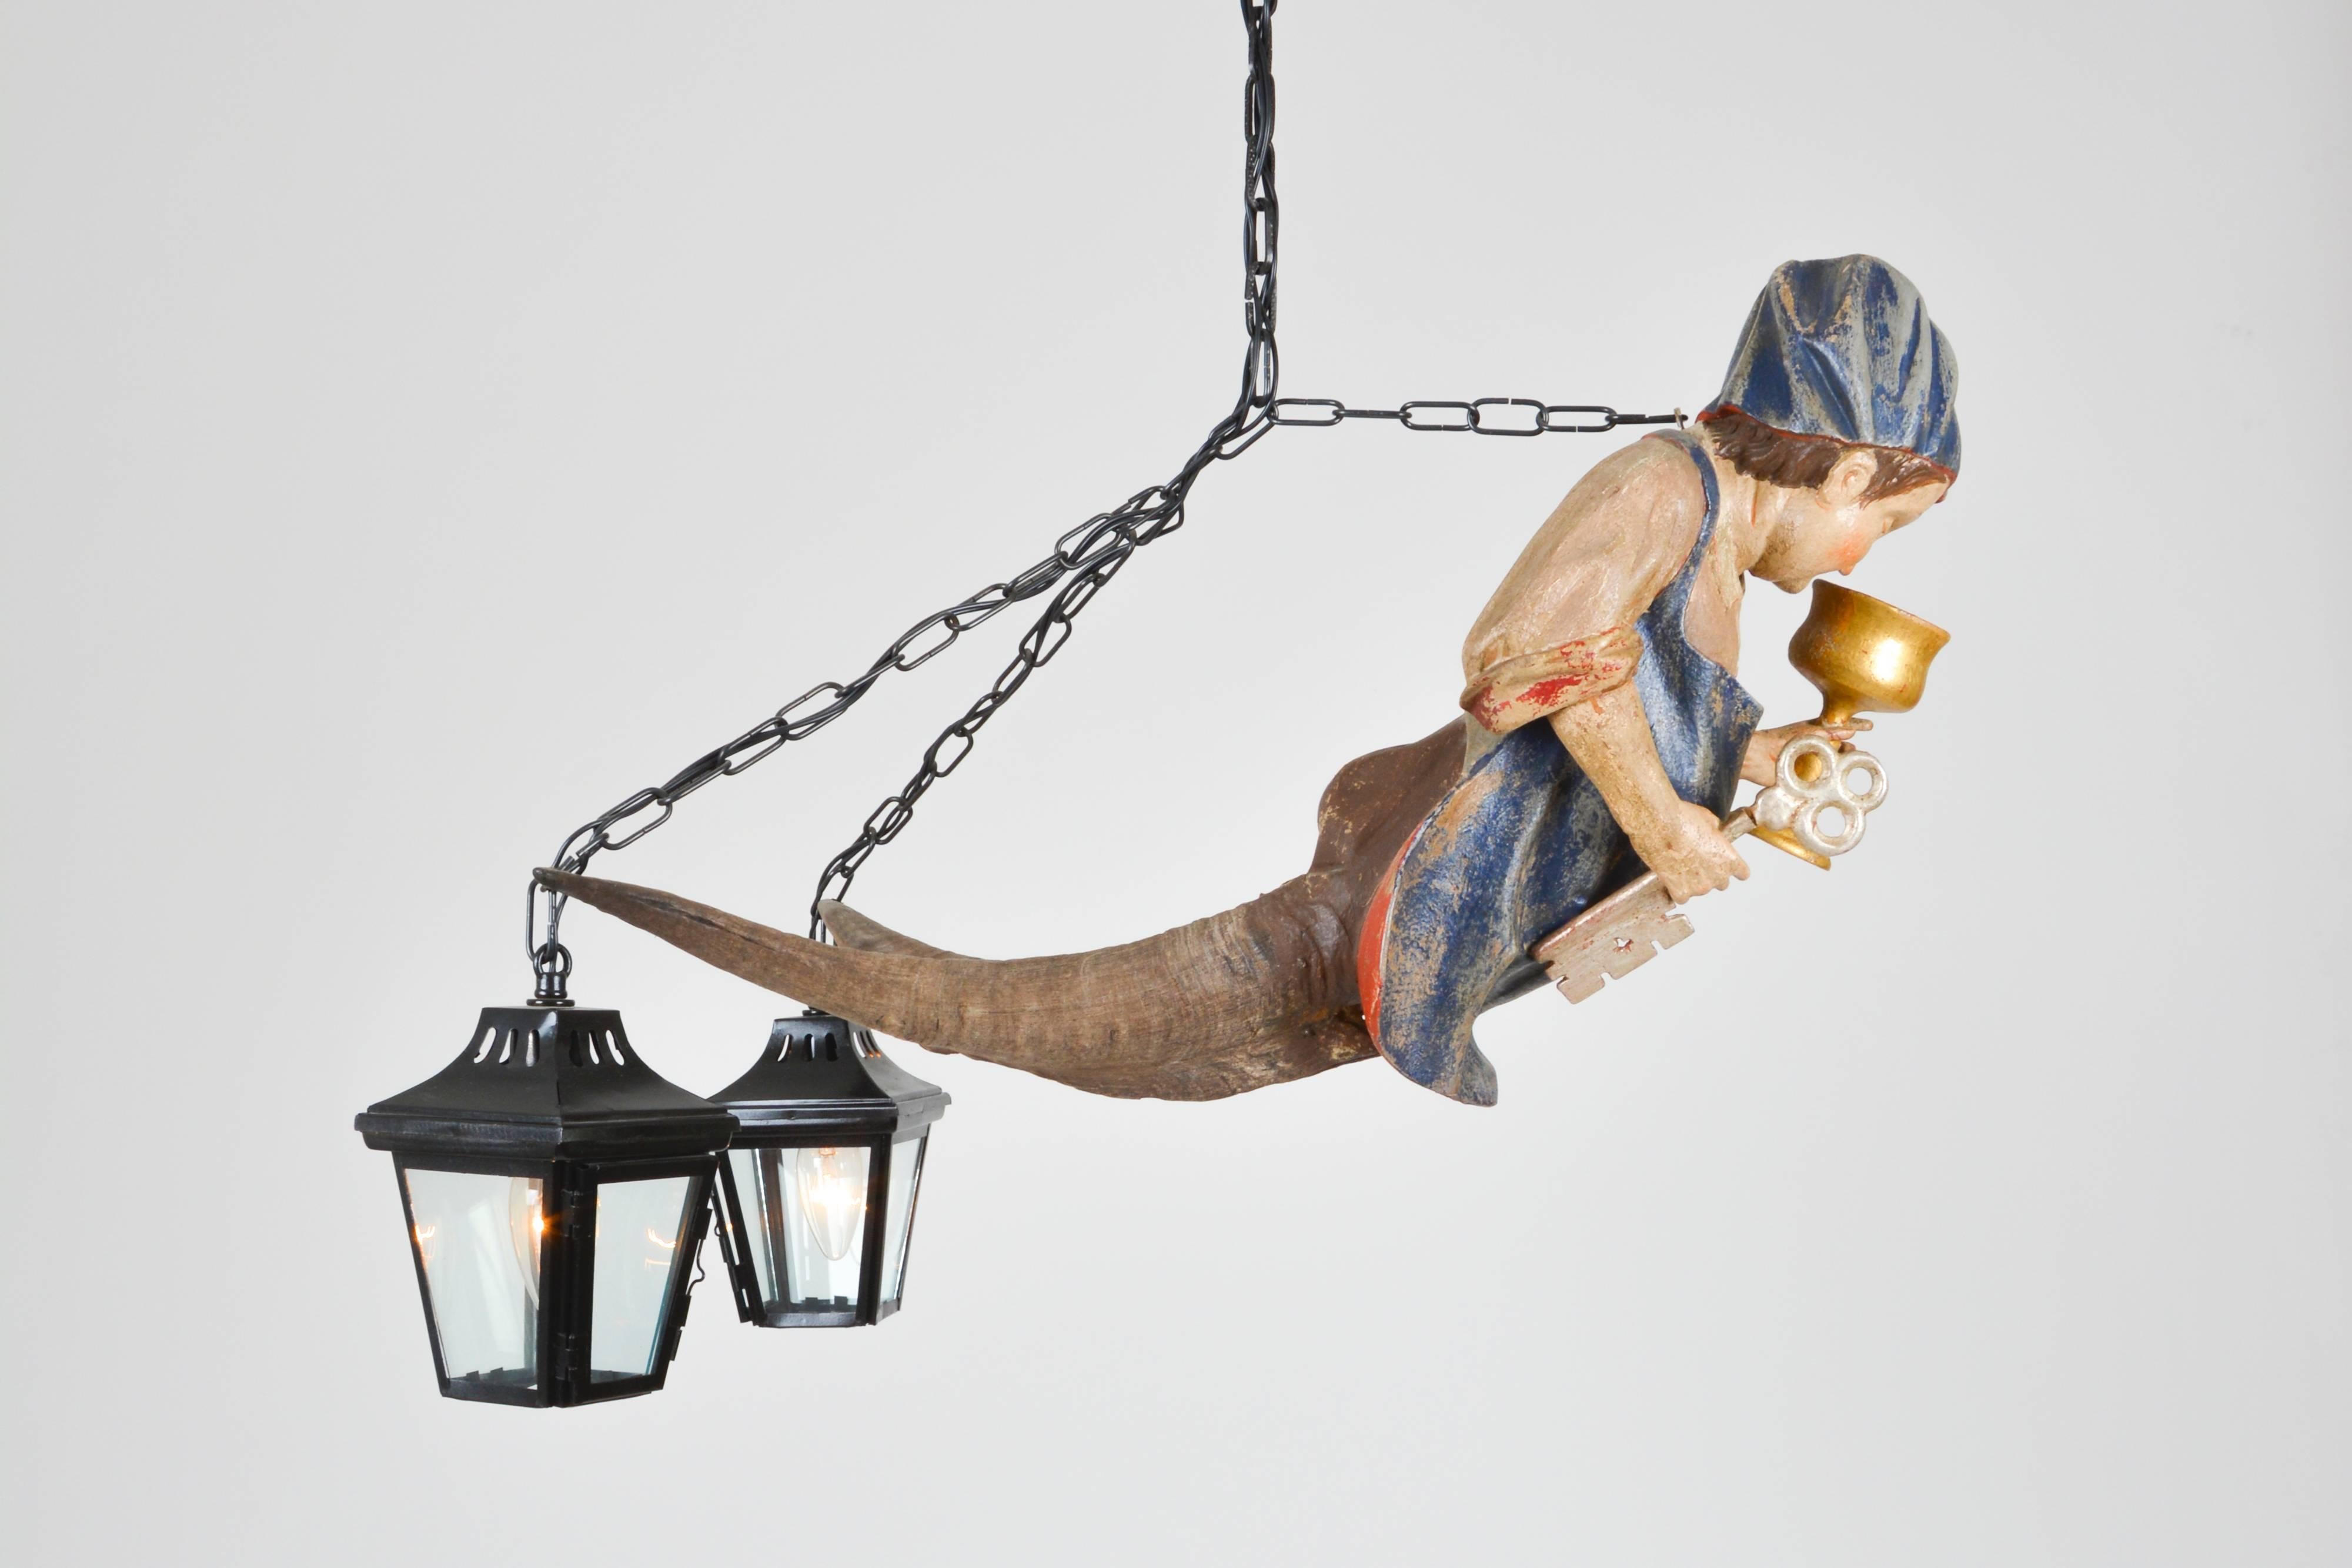 Rare male depiction of the typical rural figural chandelier called 